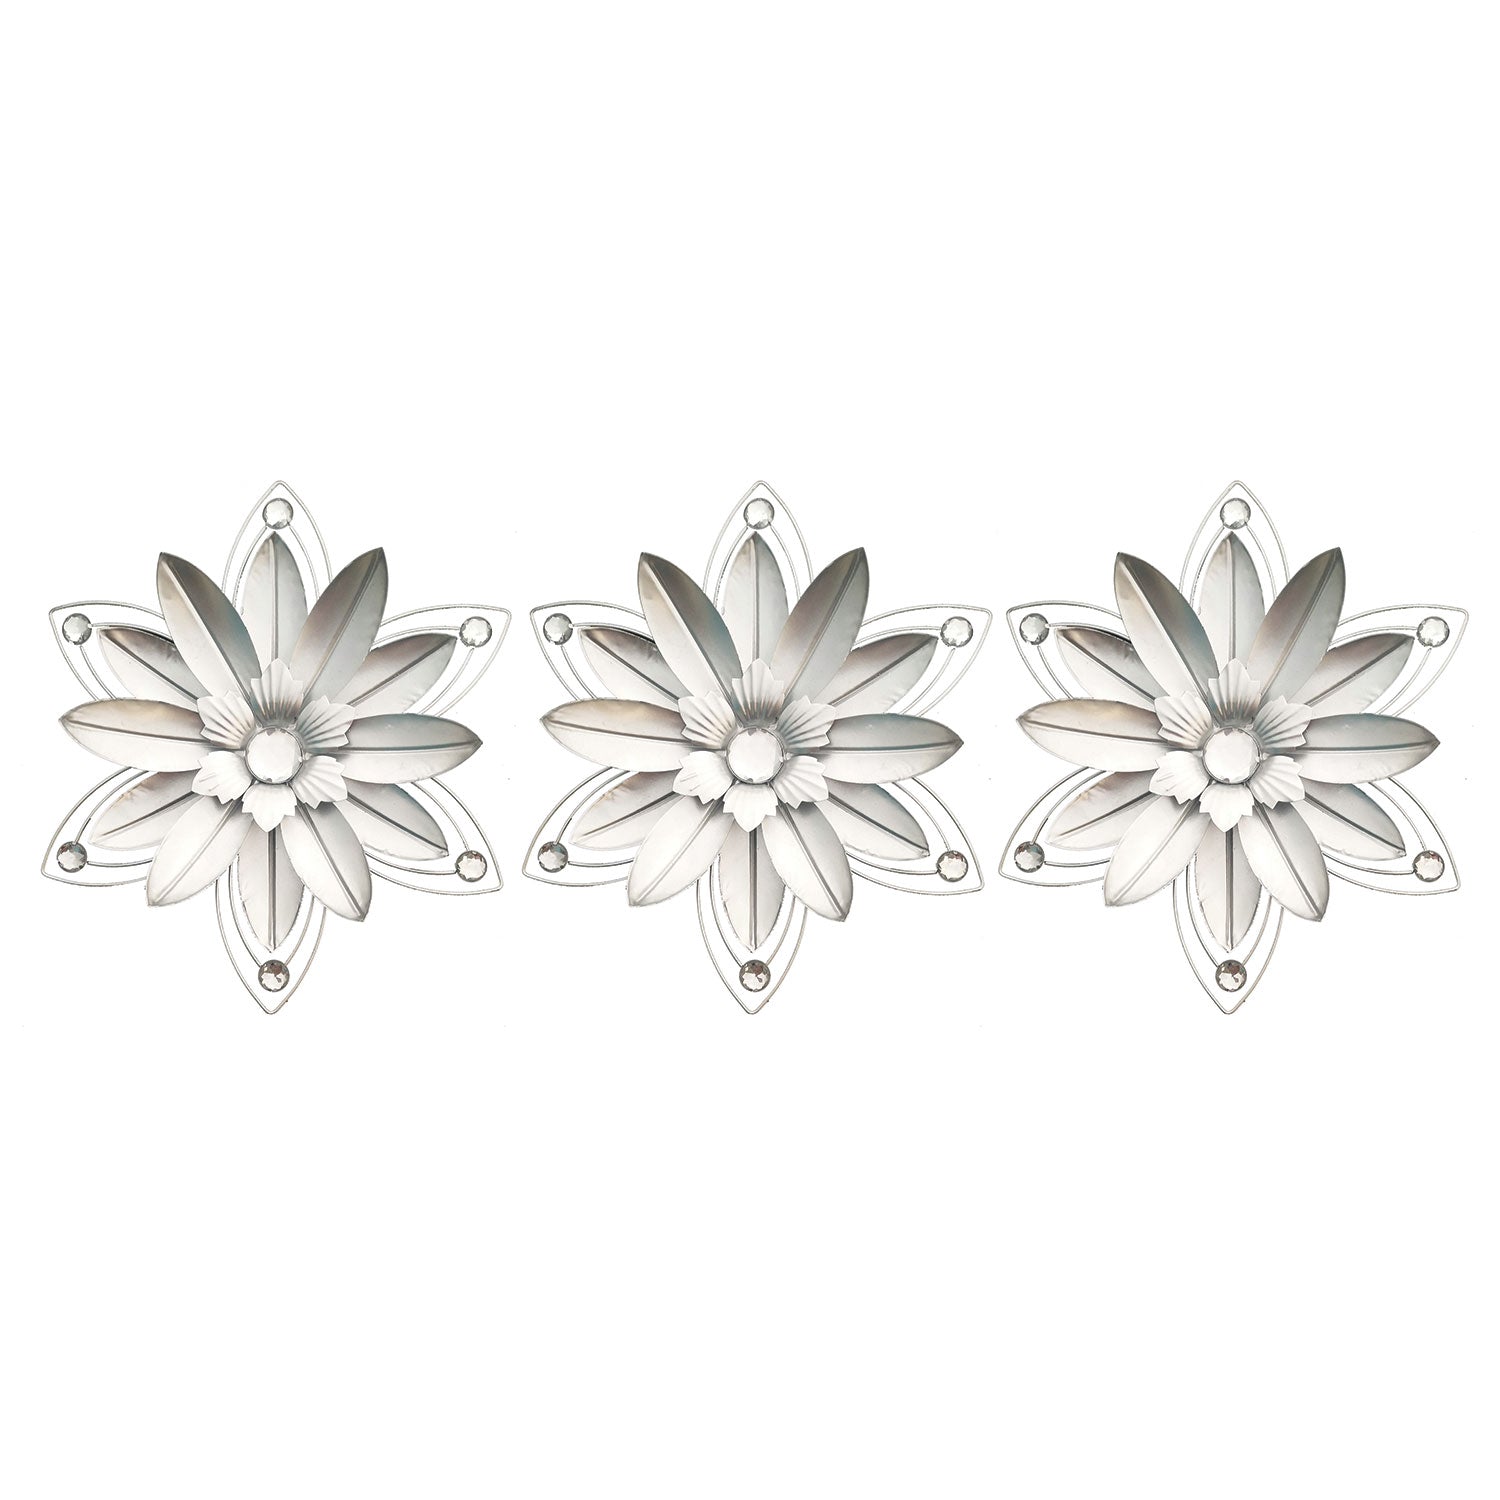 PREMIUS 3 Piece Metal Jeweled Floral Petals Wall Decor, Silver, 12 Inches